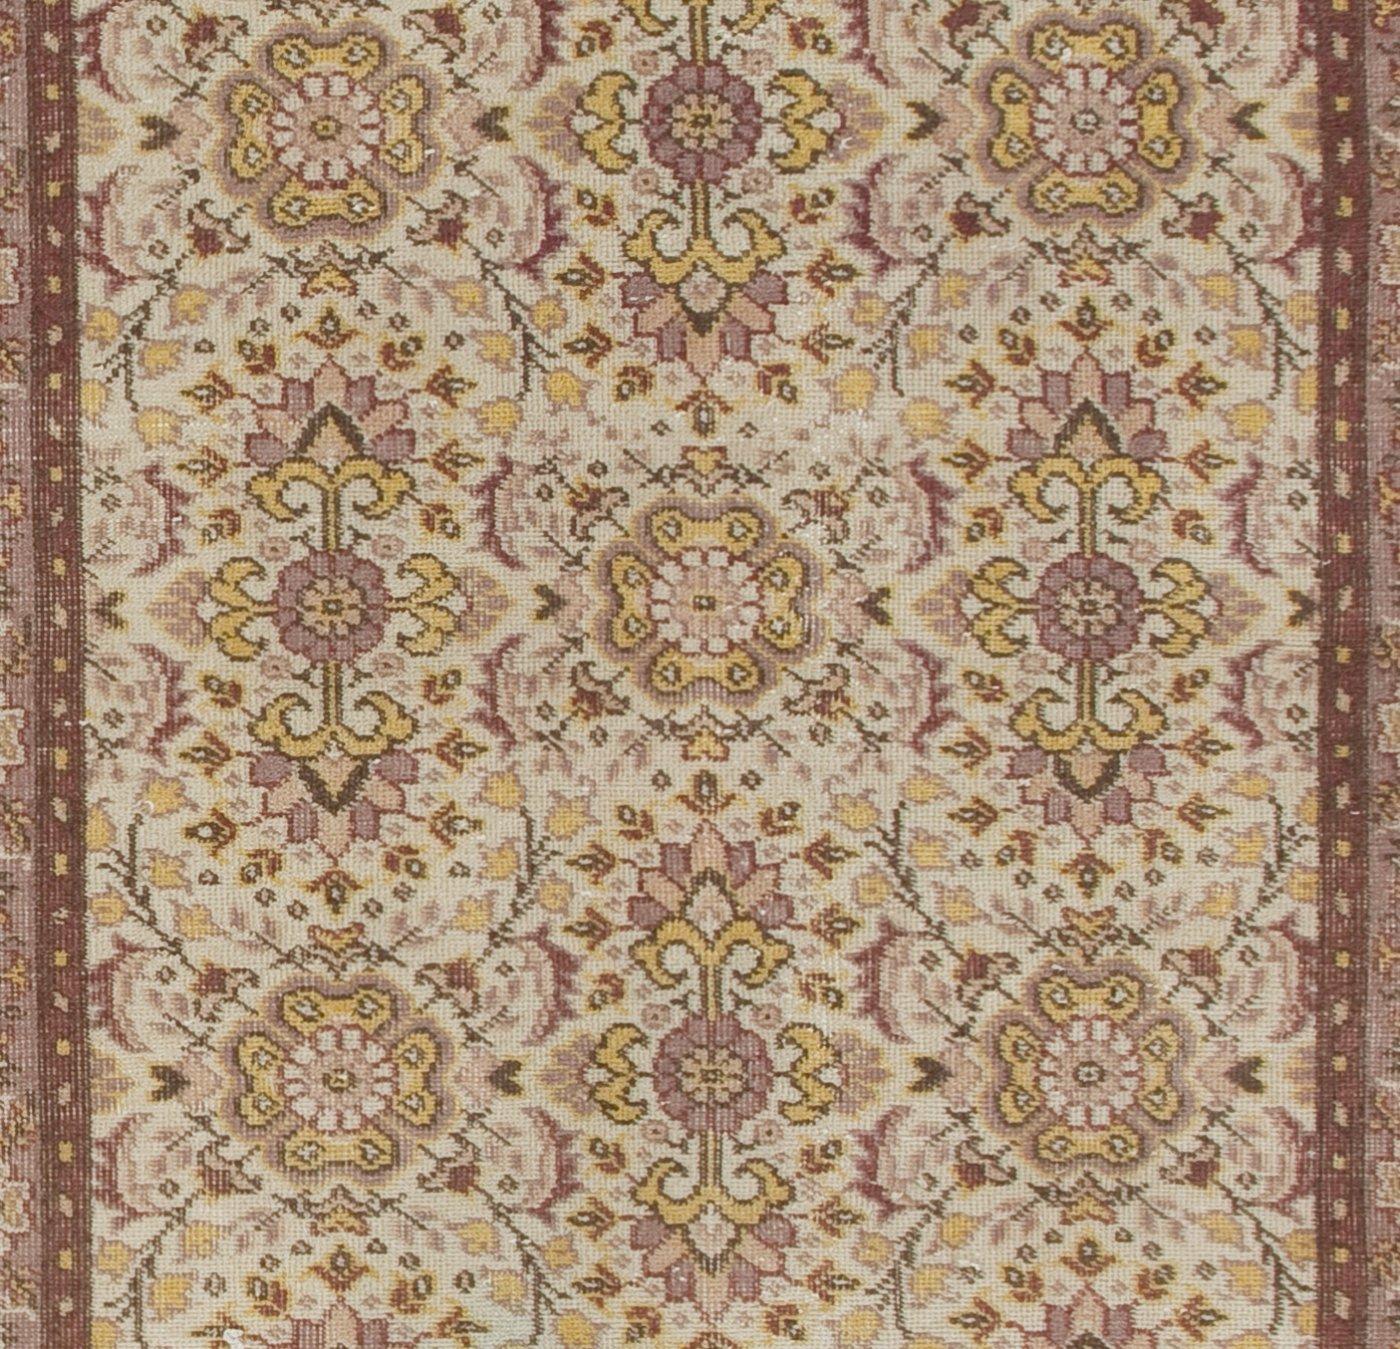 Hand-Woven 4x7 ft Vintage Floral Handmade Turkish Accent ARug, Ideal for Home and Office For Sale